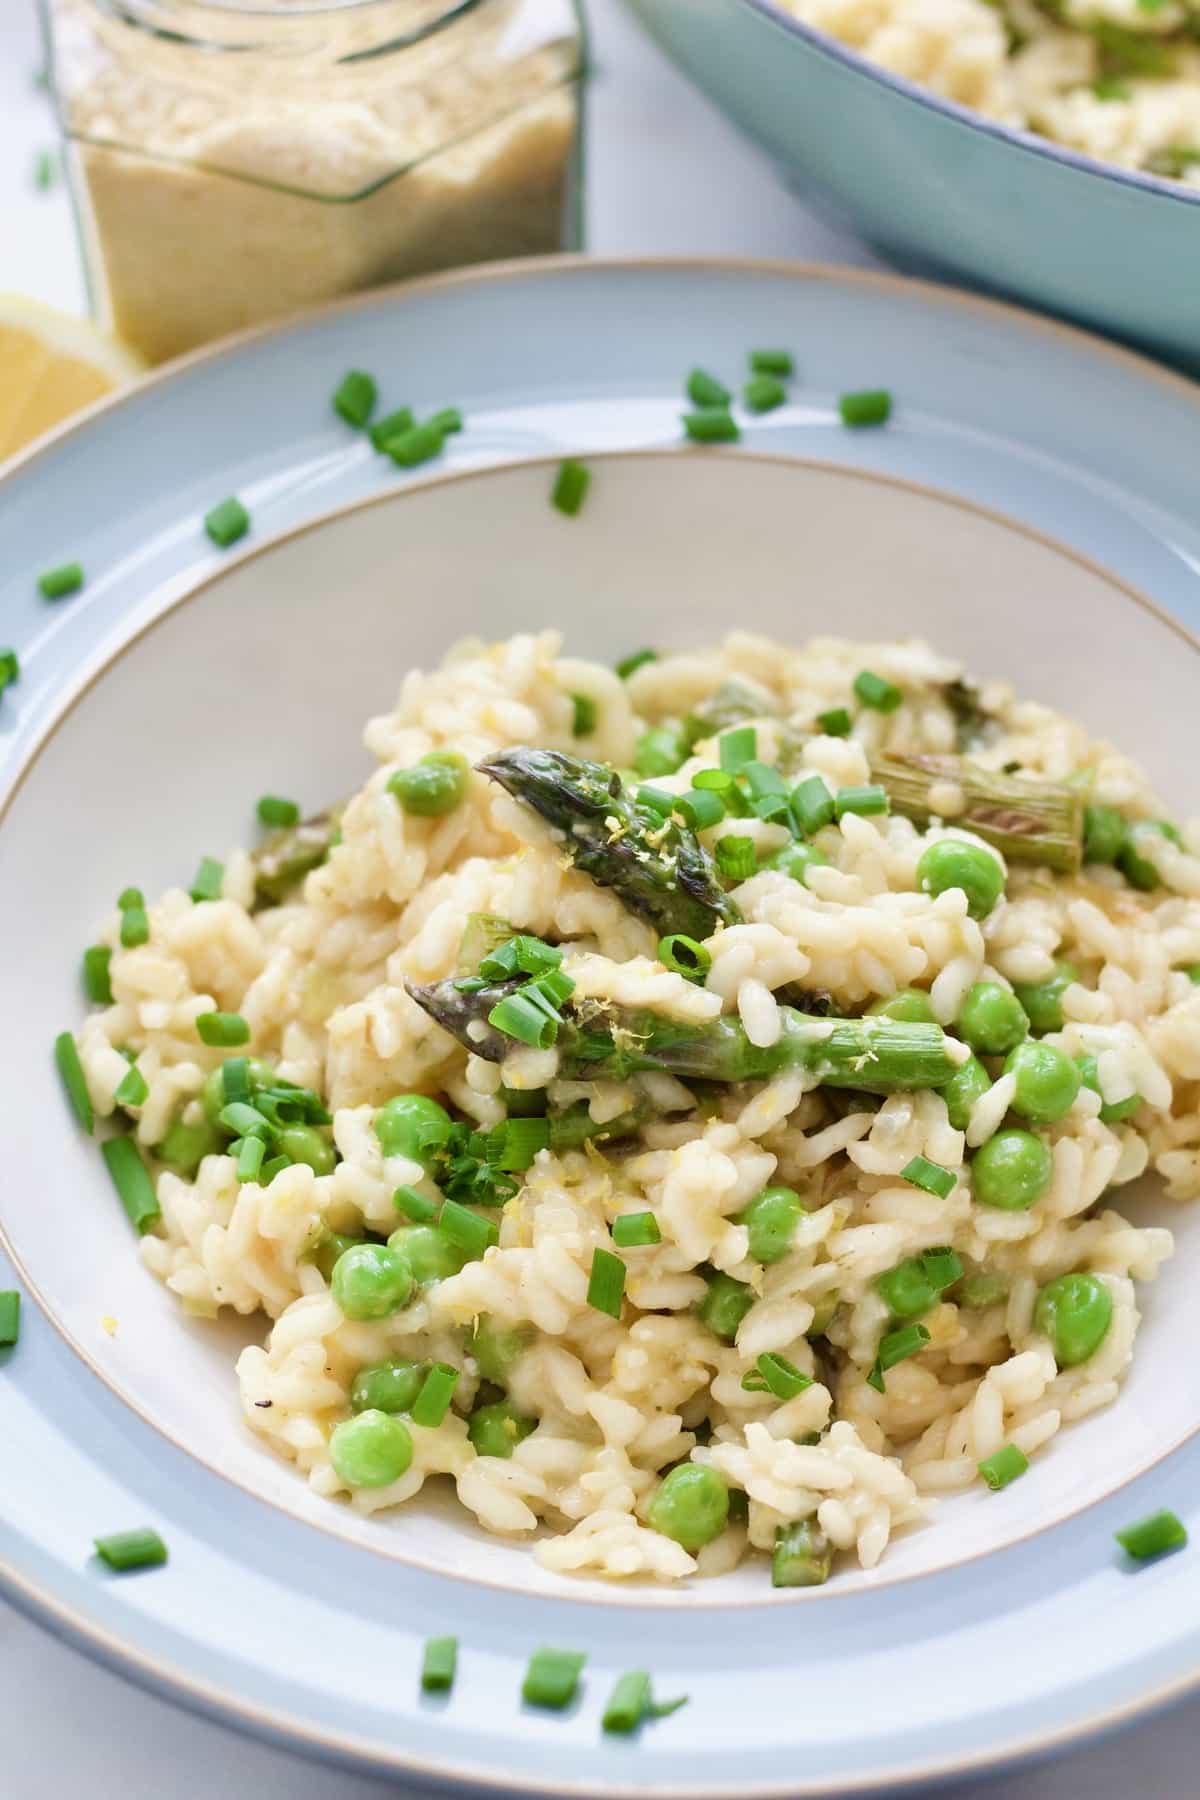 Bowl with asparagus risotto, sprinkled with chives.